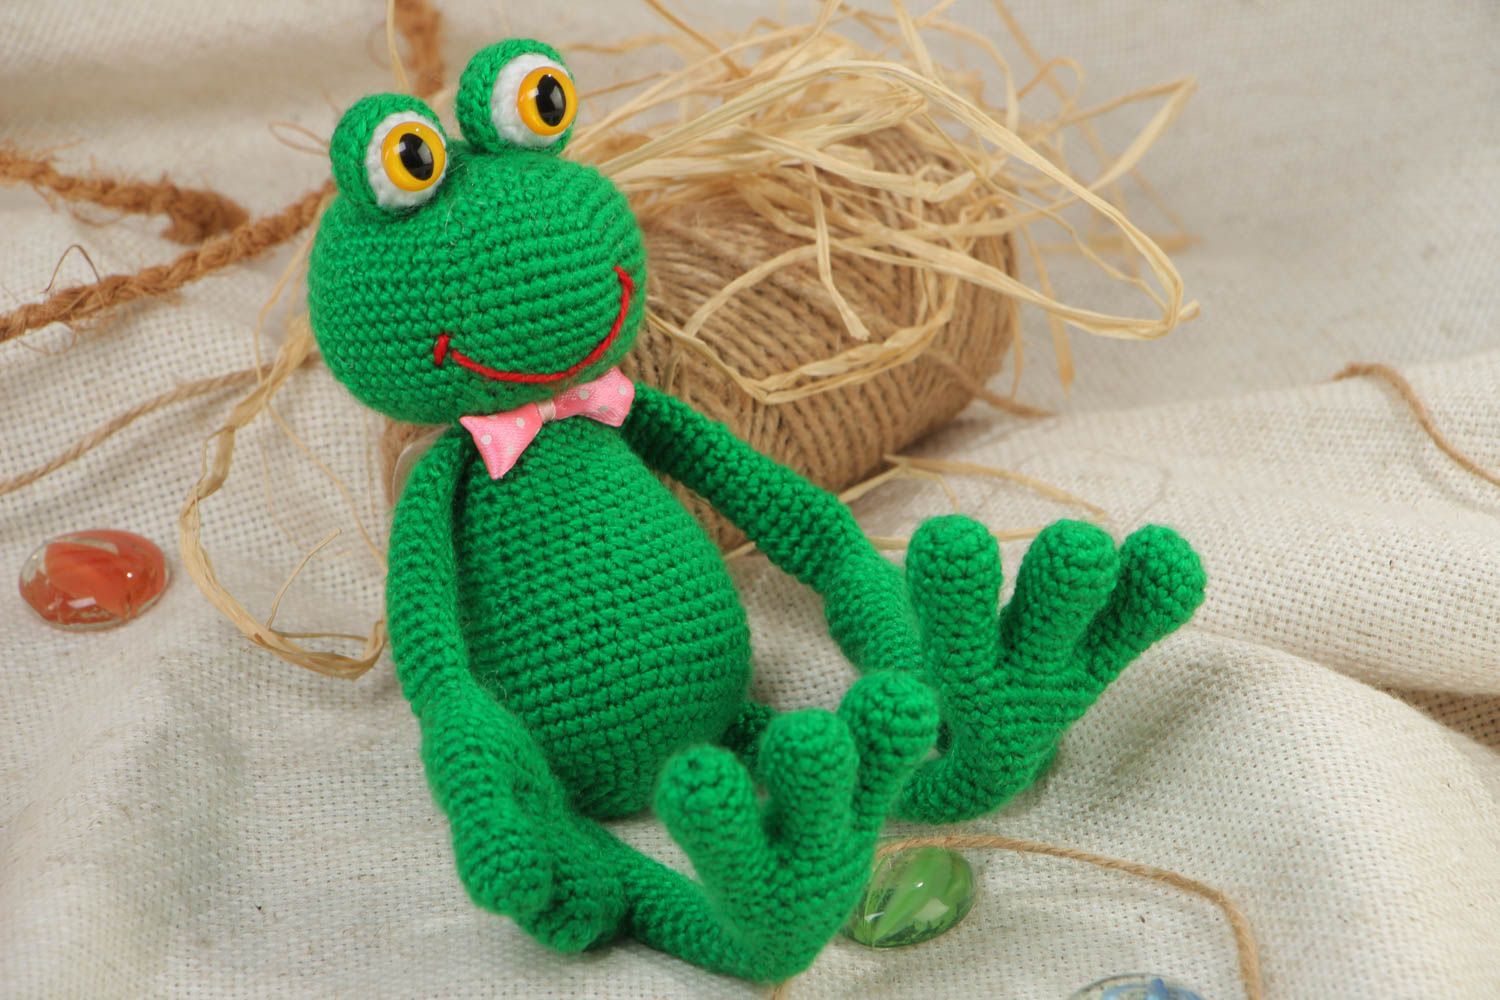 Handmade soft toy crocheted of acrylic threads bright green frog with bow tie photo 1